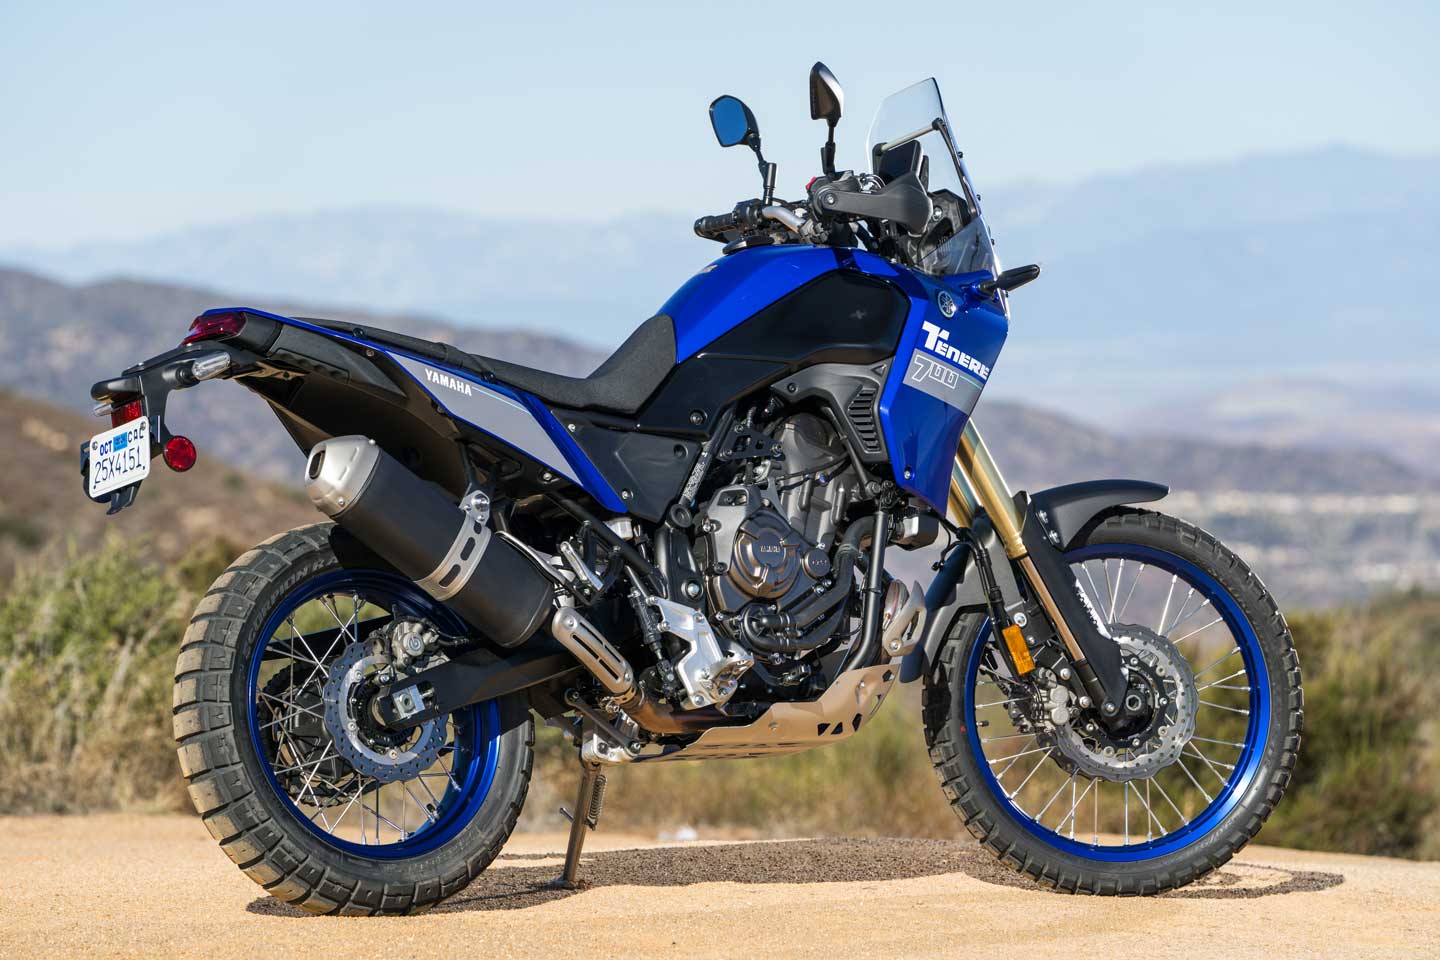 2022 Yamaha Tenere 700 Review: An Old-School Bike Designed for the